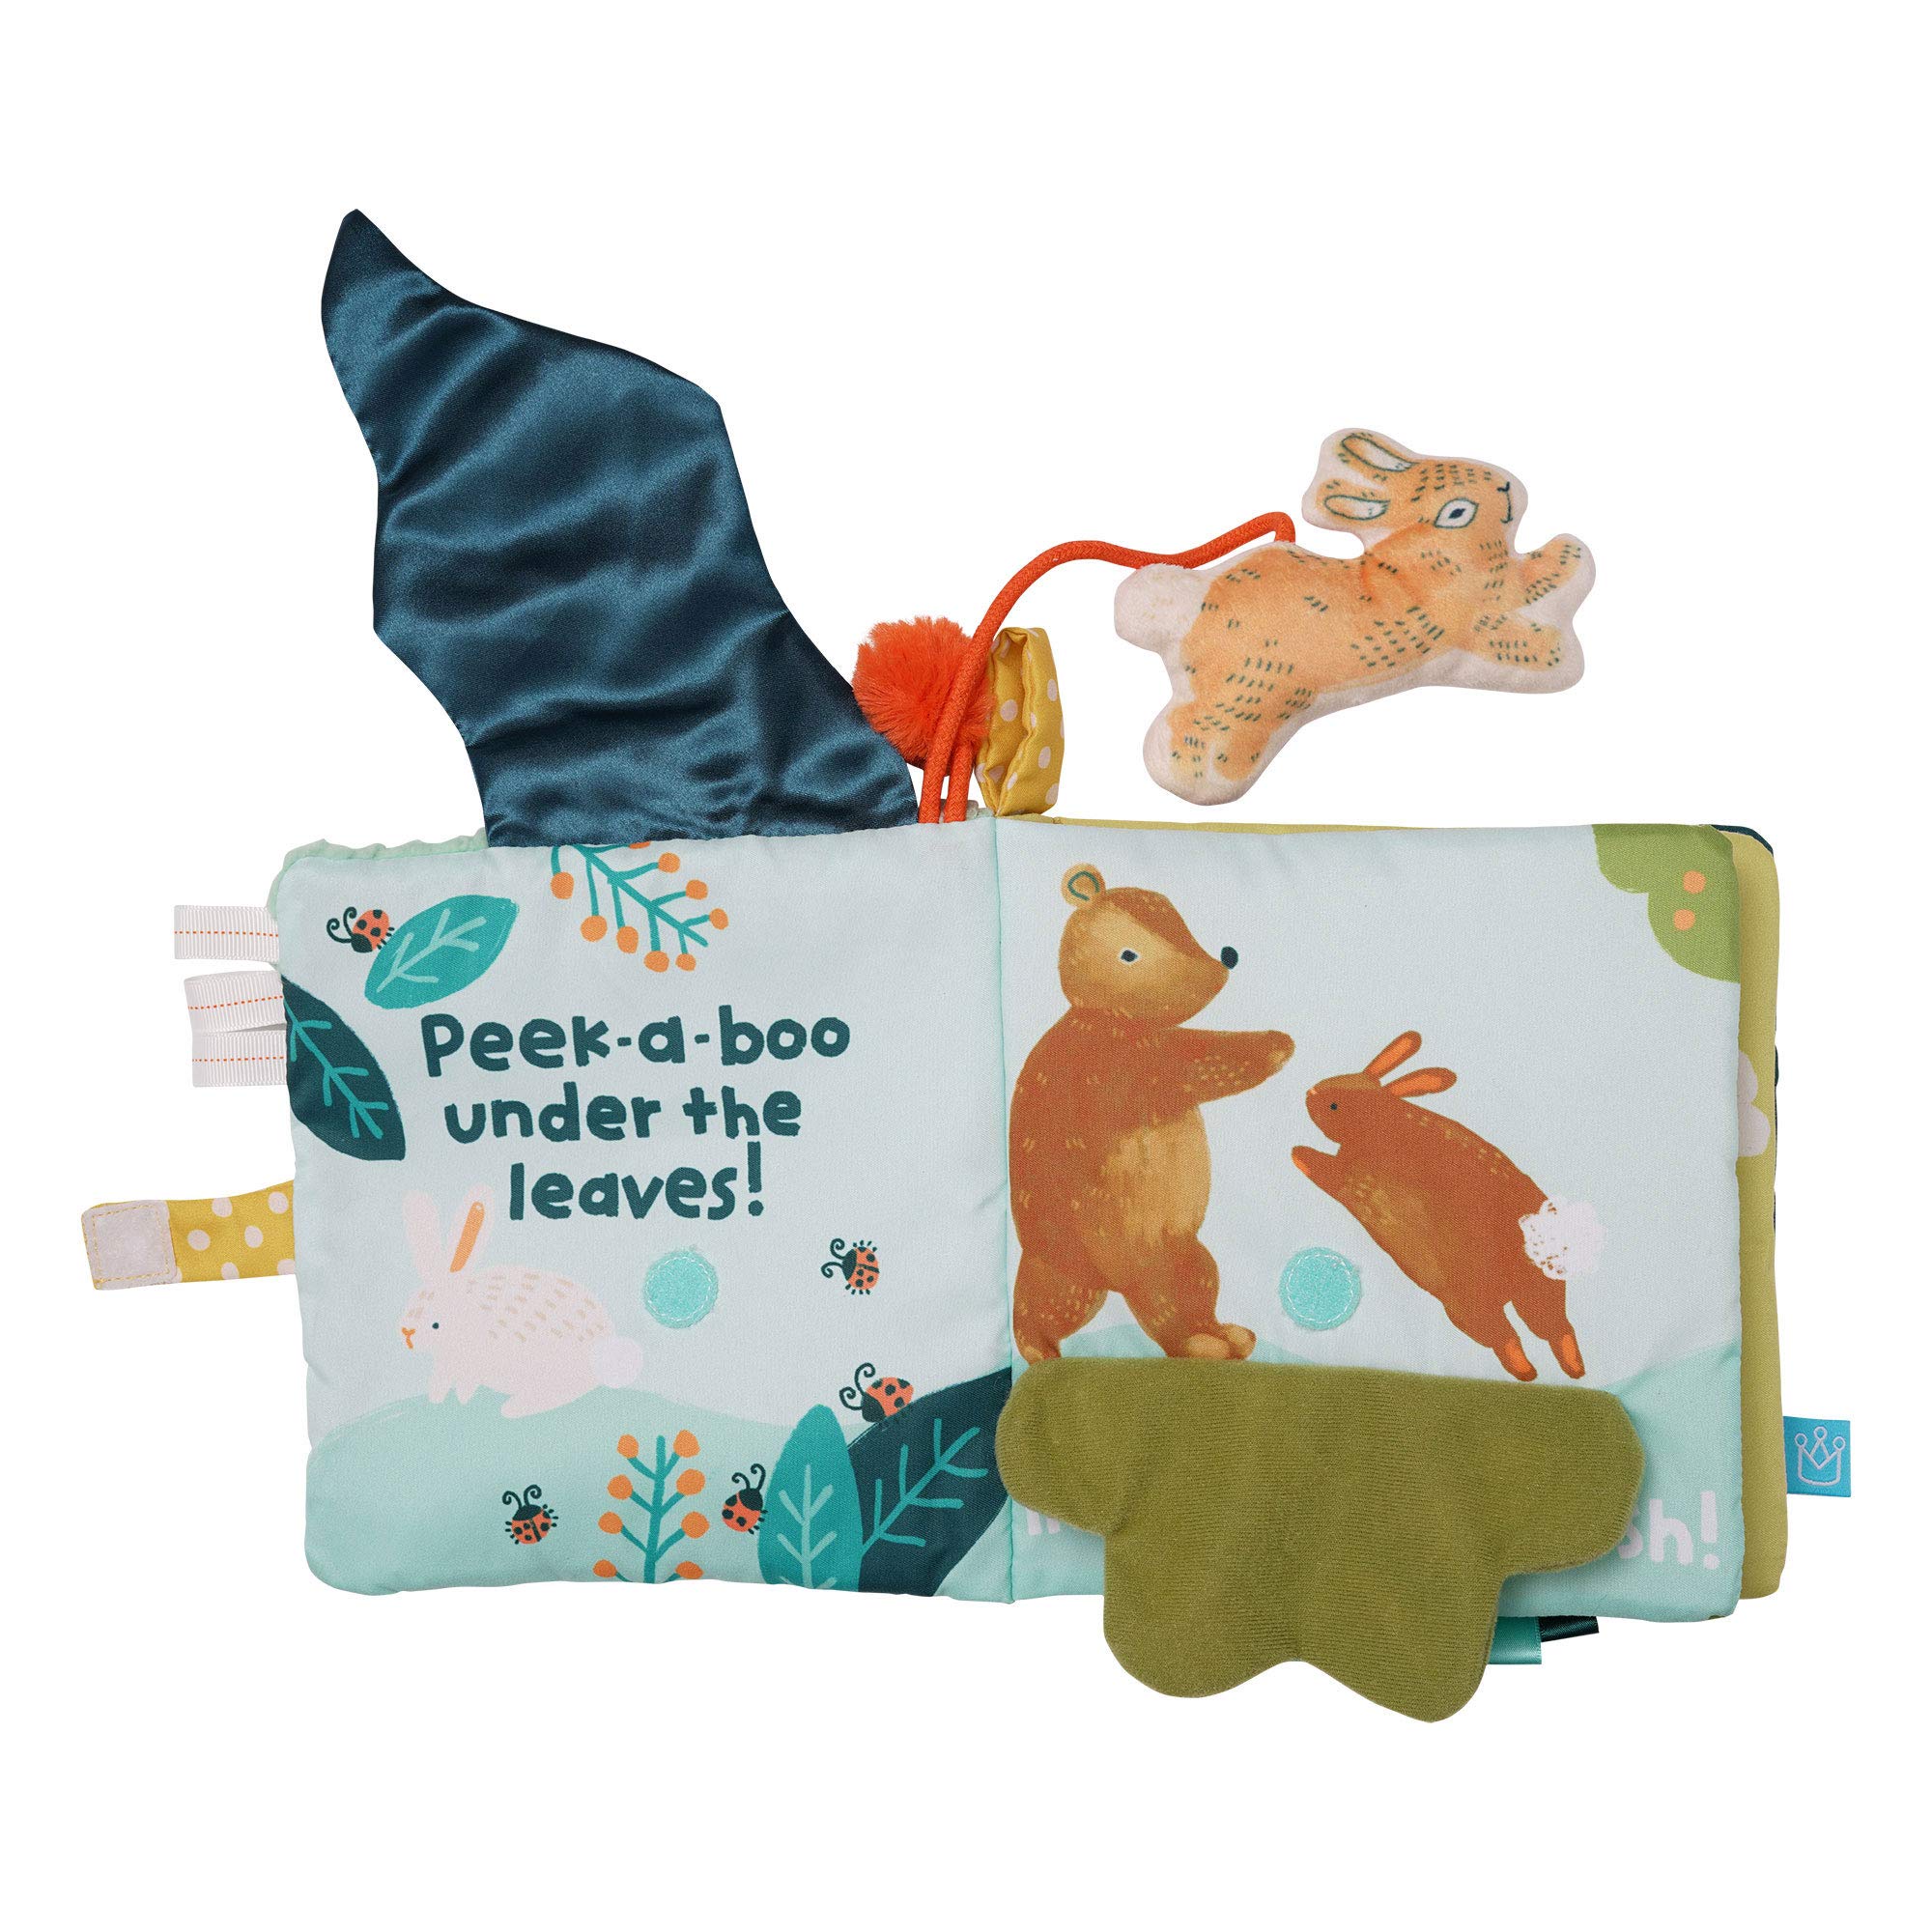 Manhattan Toy Fairytale Peek-a-Boo Soft Activity Crinkle Book for Baby & Toddler with Tethered Bunny Squeaker